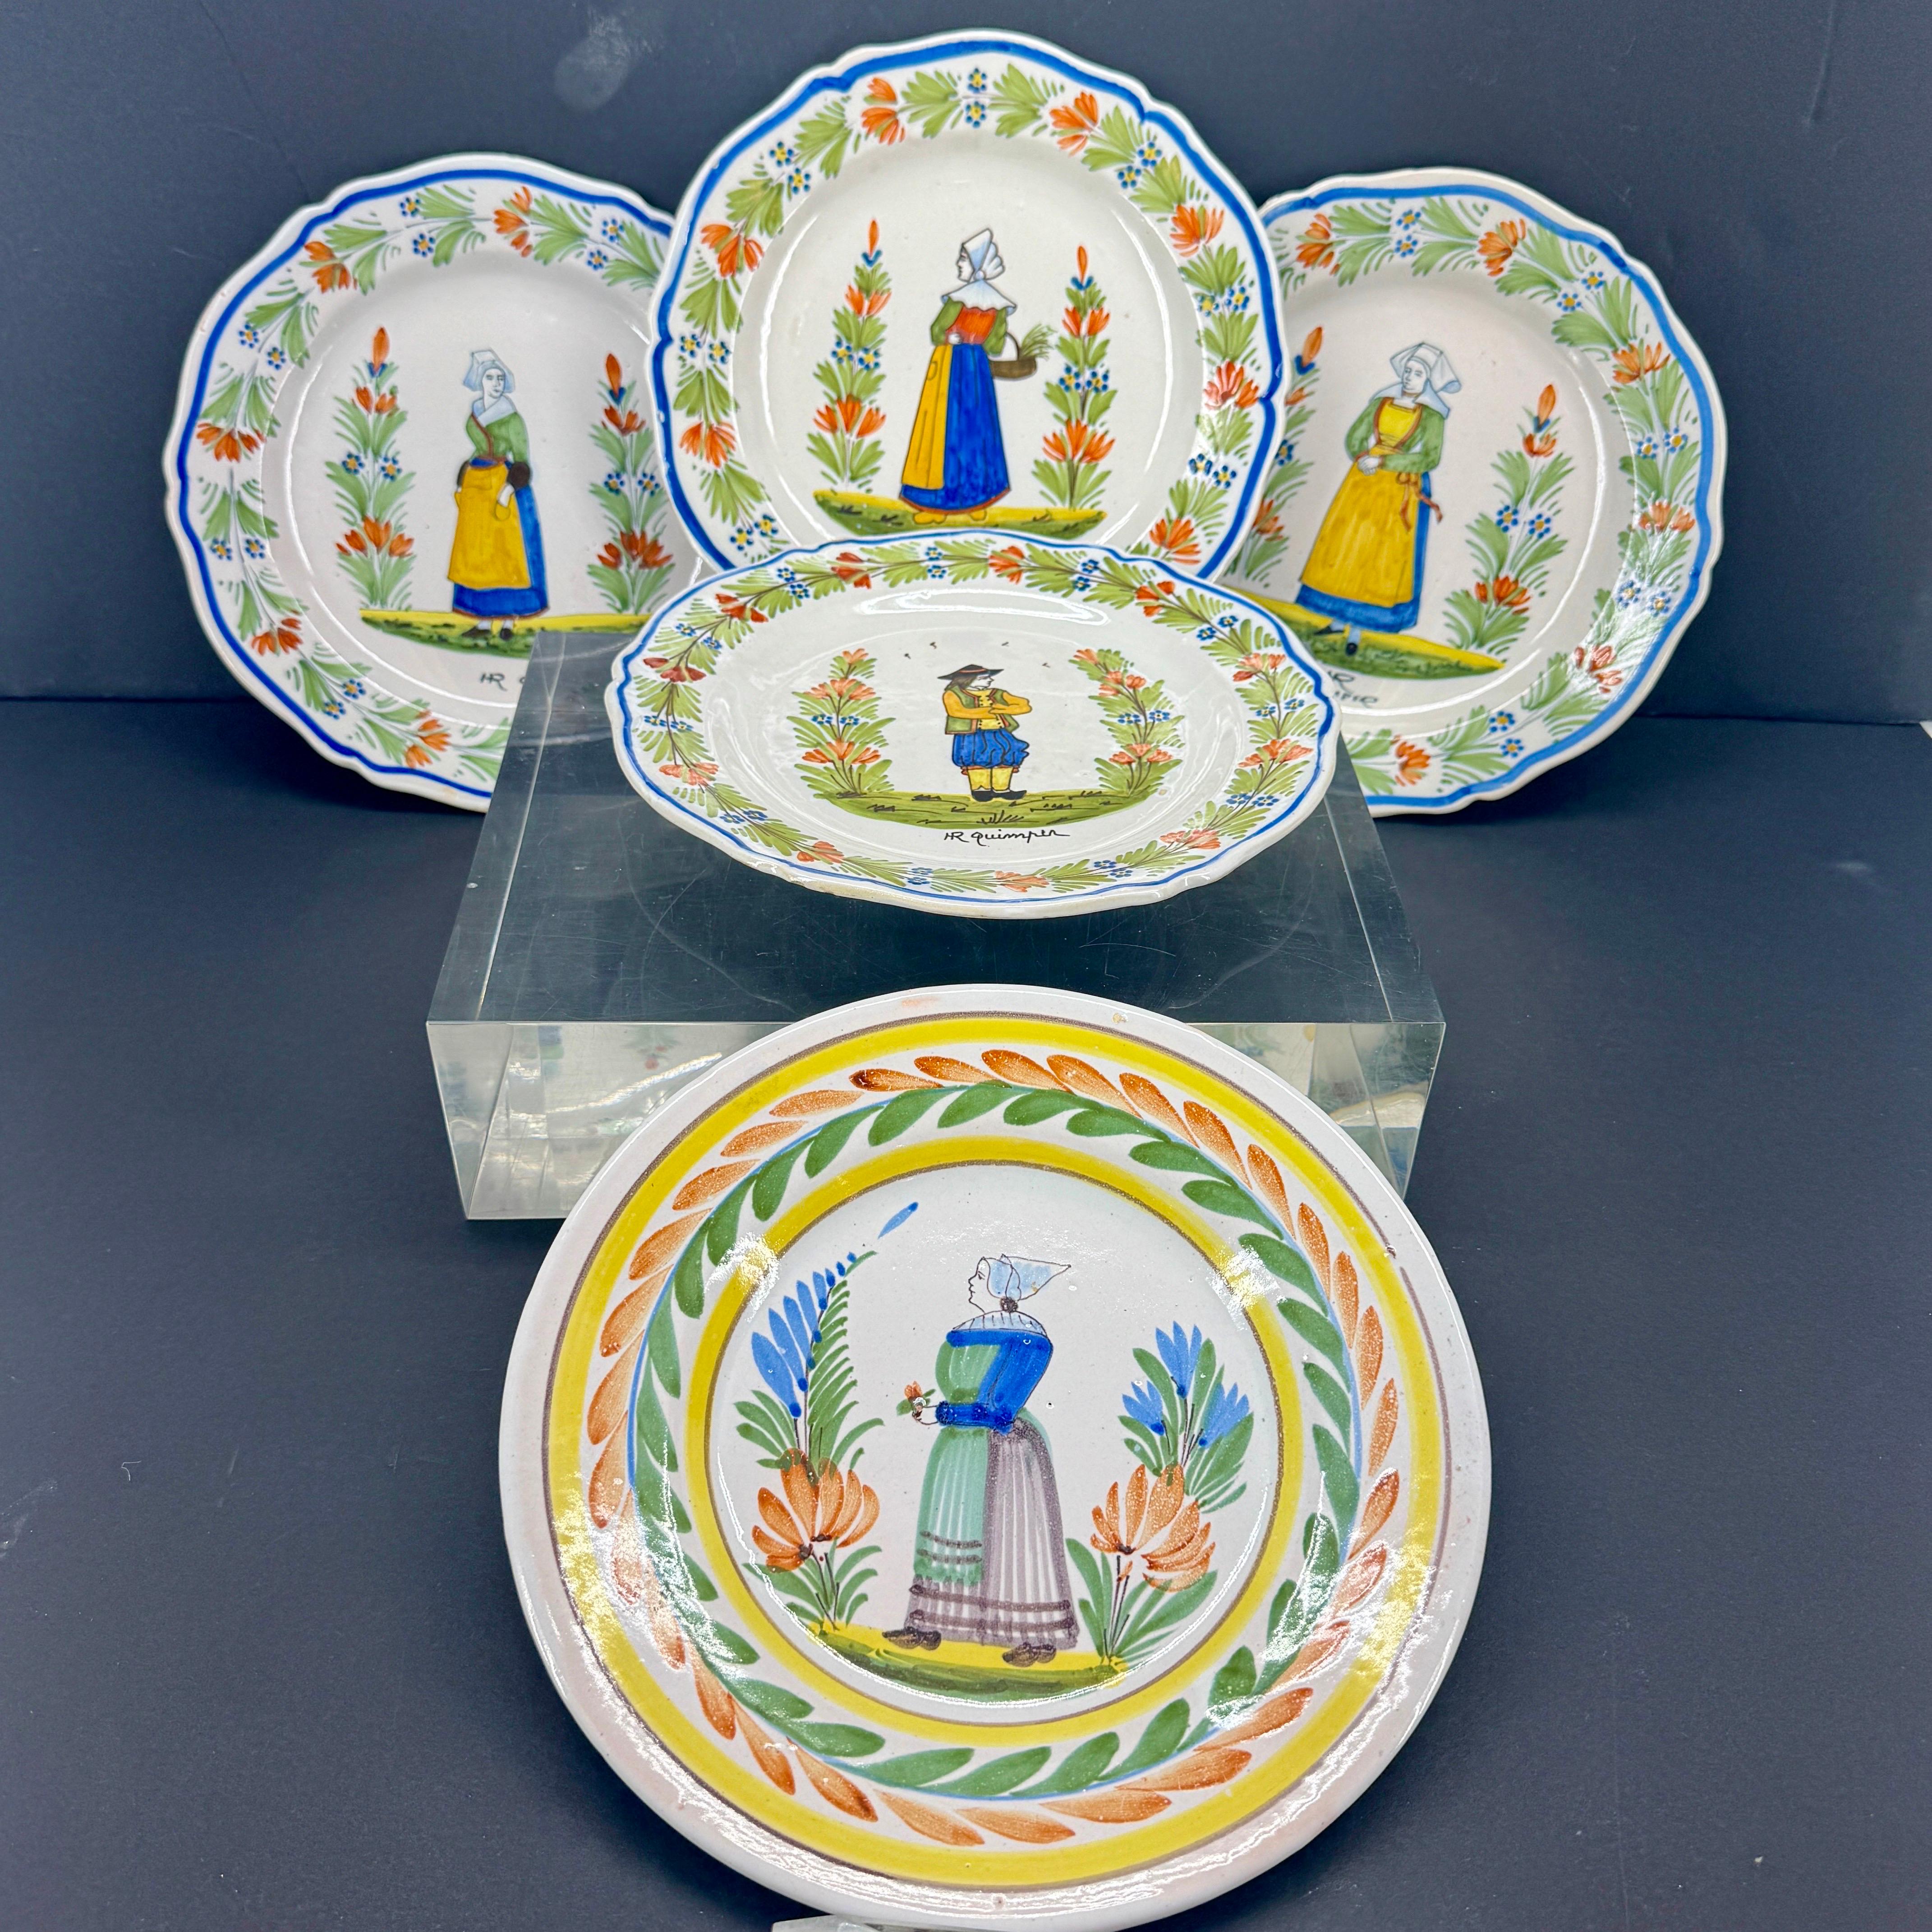 Wonderful collection of French Quimper plates. This collection has been curated over the years and would make a fantastic colorful statement piece on any coffee table or dining room sideboard stacked up. Add to an existing collection or start a new